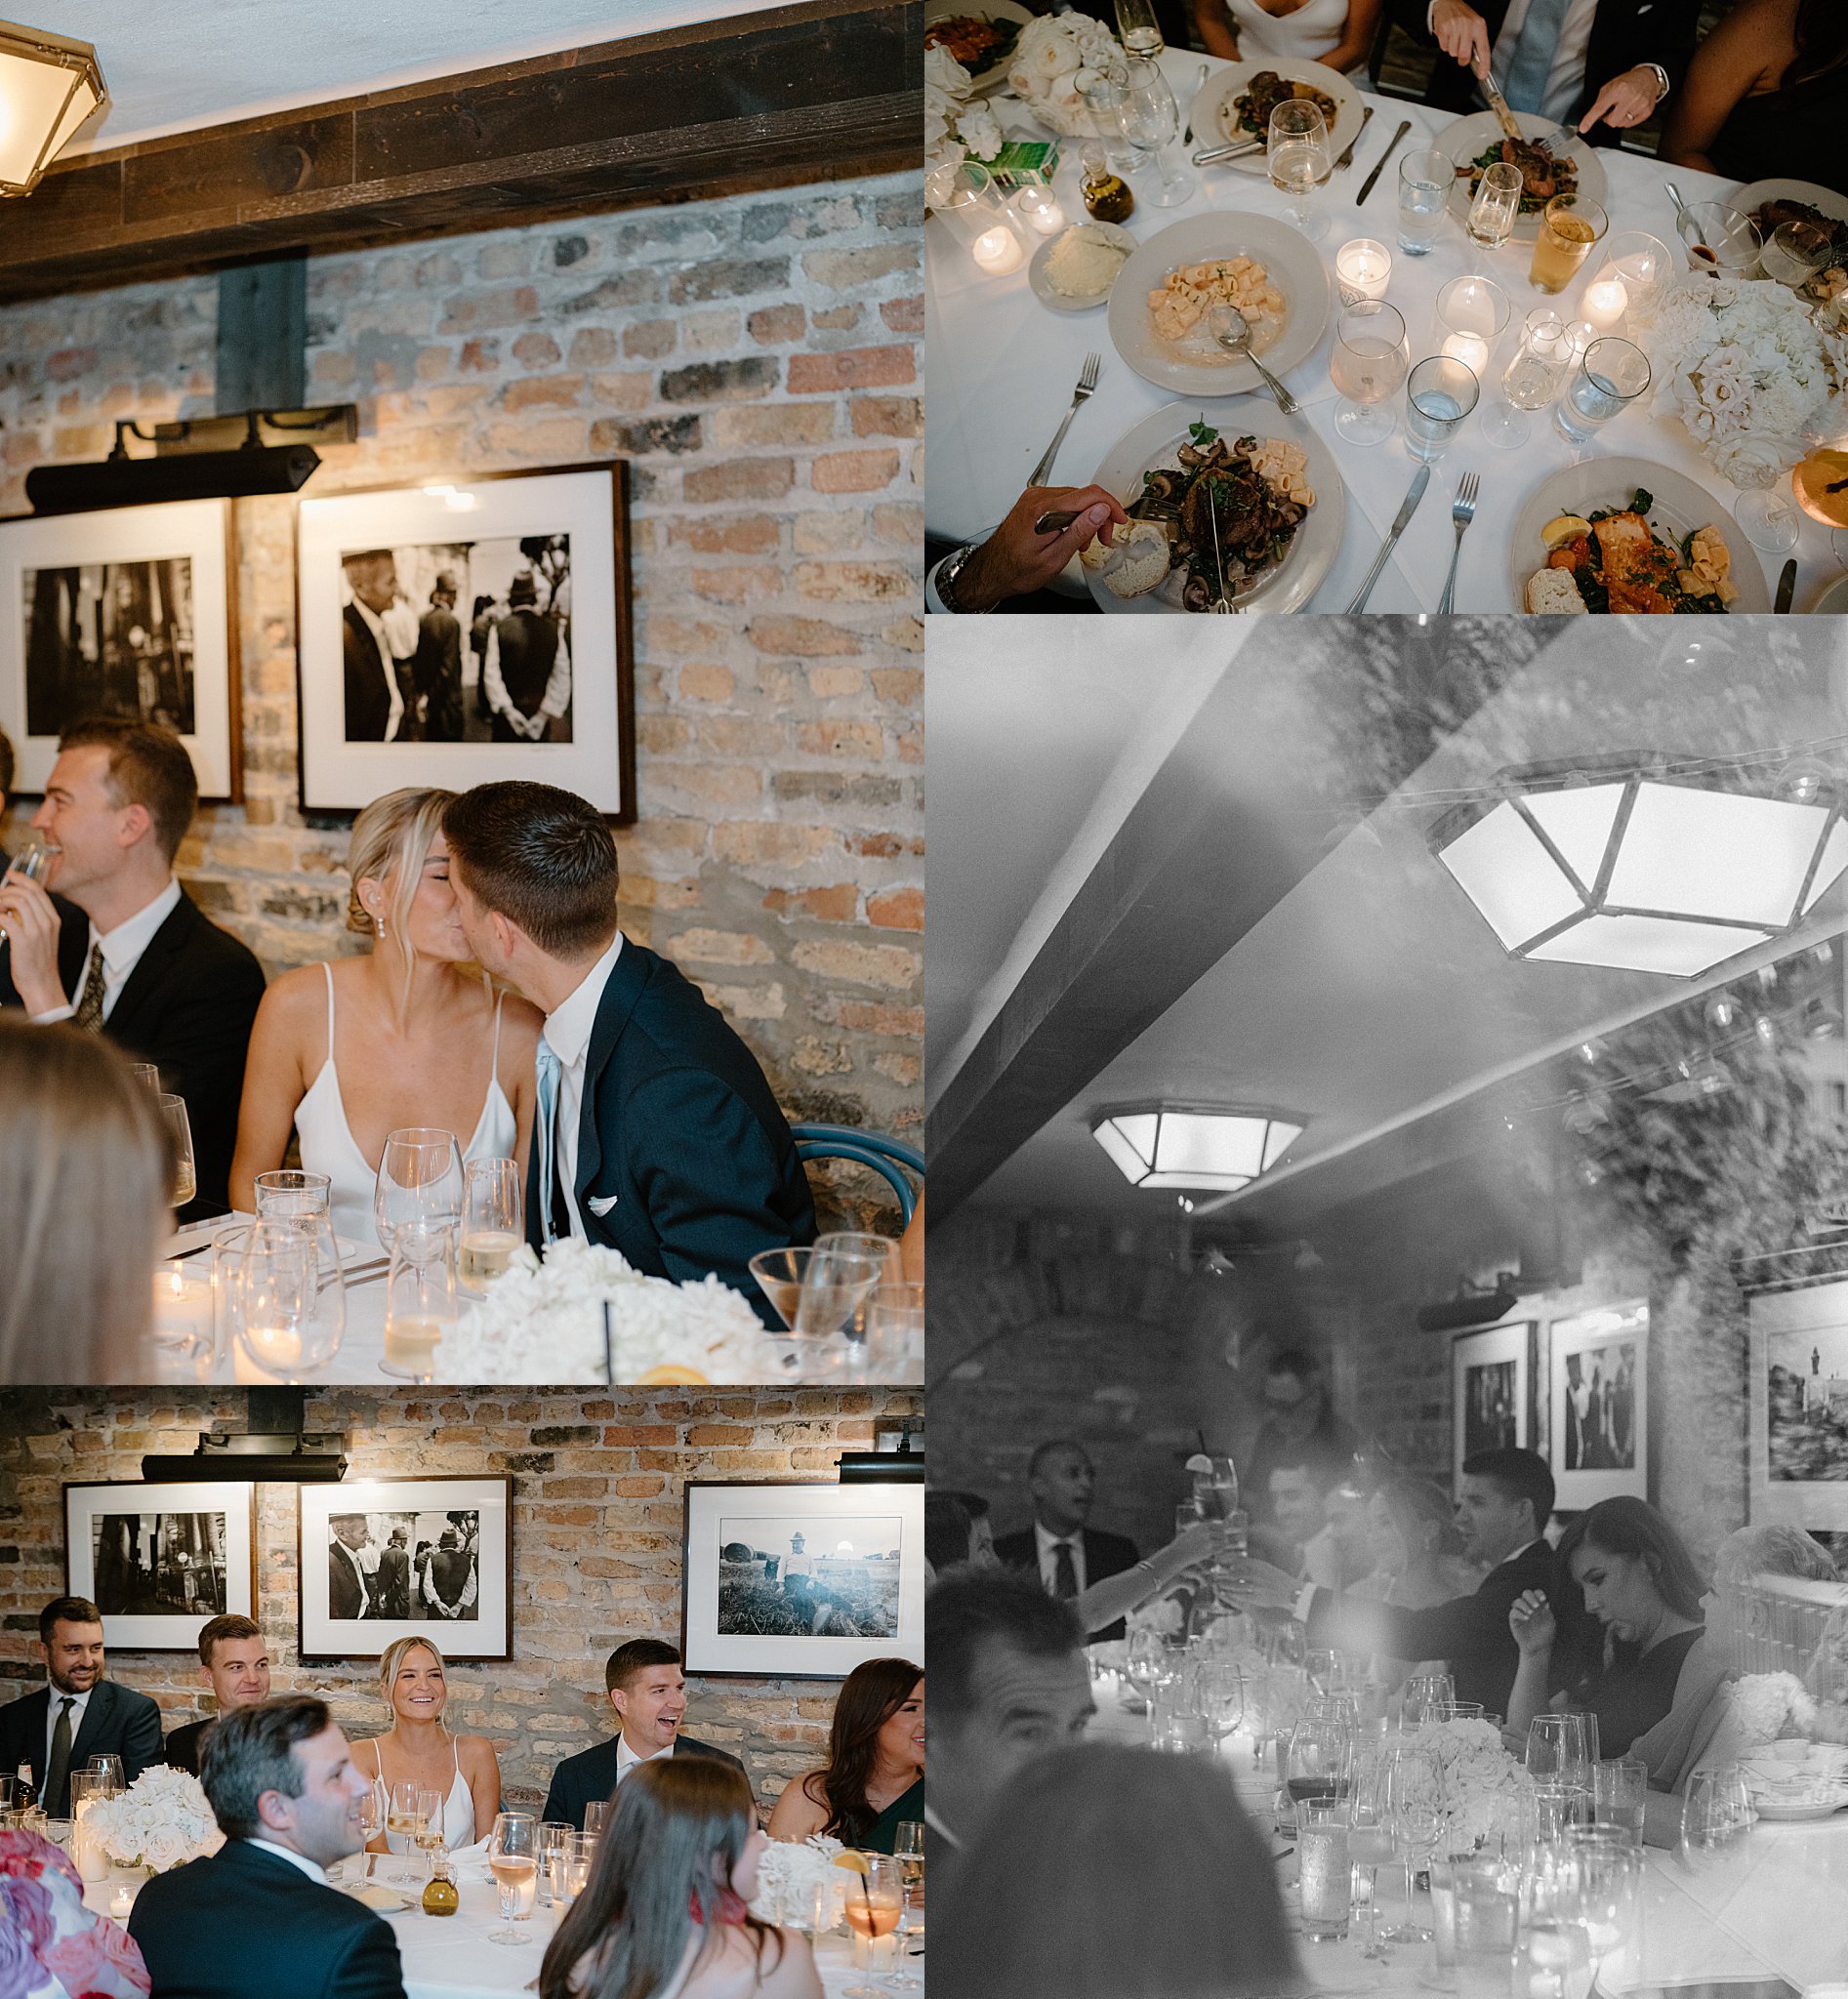 guests enjoy dinner together at reception by Indigo Lace Collective